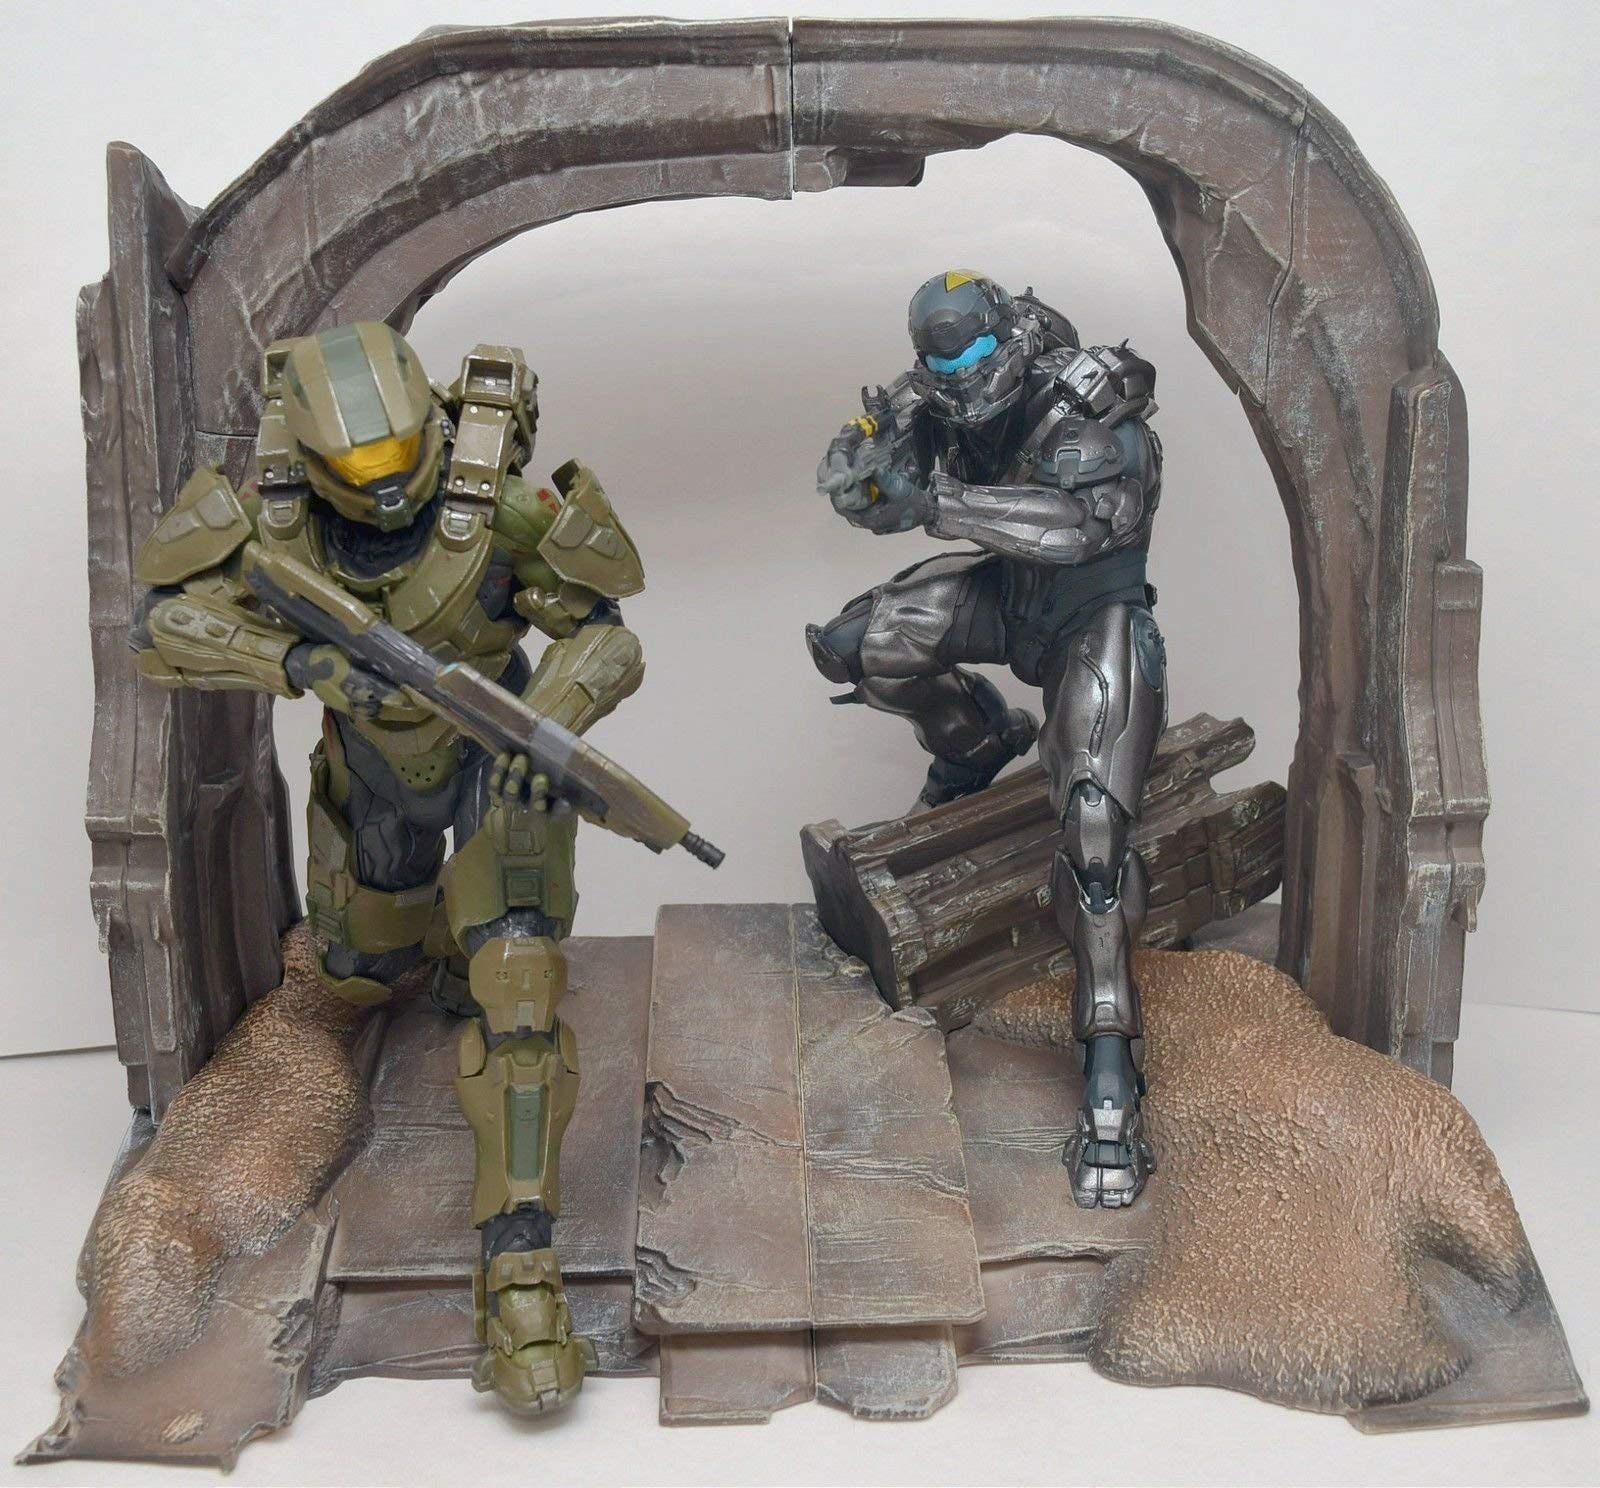 Xbox One Halo 5 Guardians Collector's Master Chief Spartan Locke Statues Figures Display ONLY, GAME NOT INCLUDED